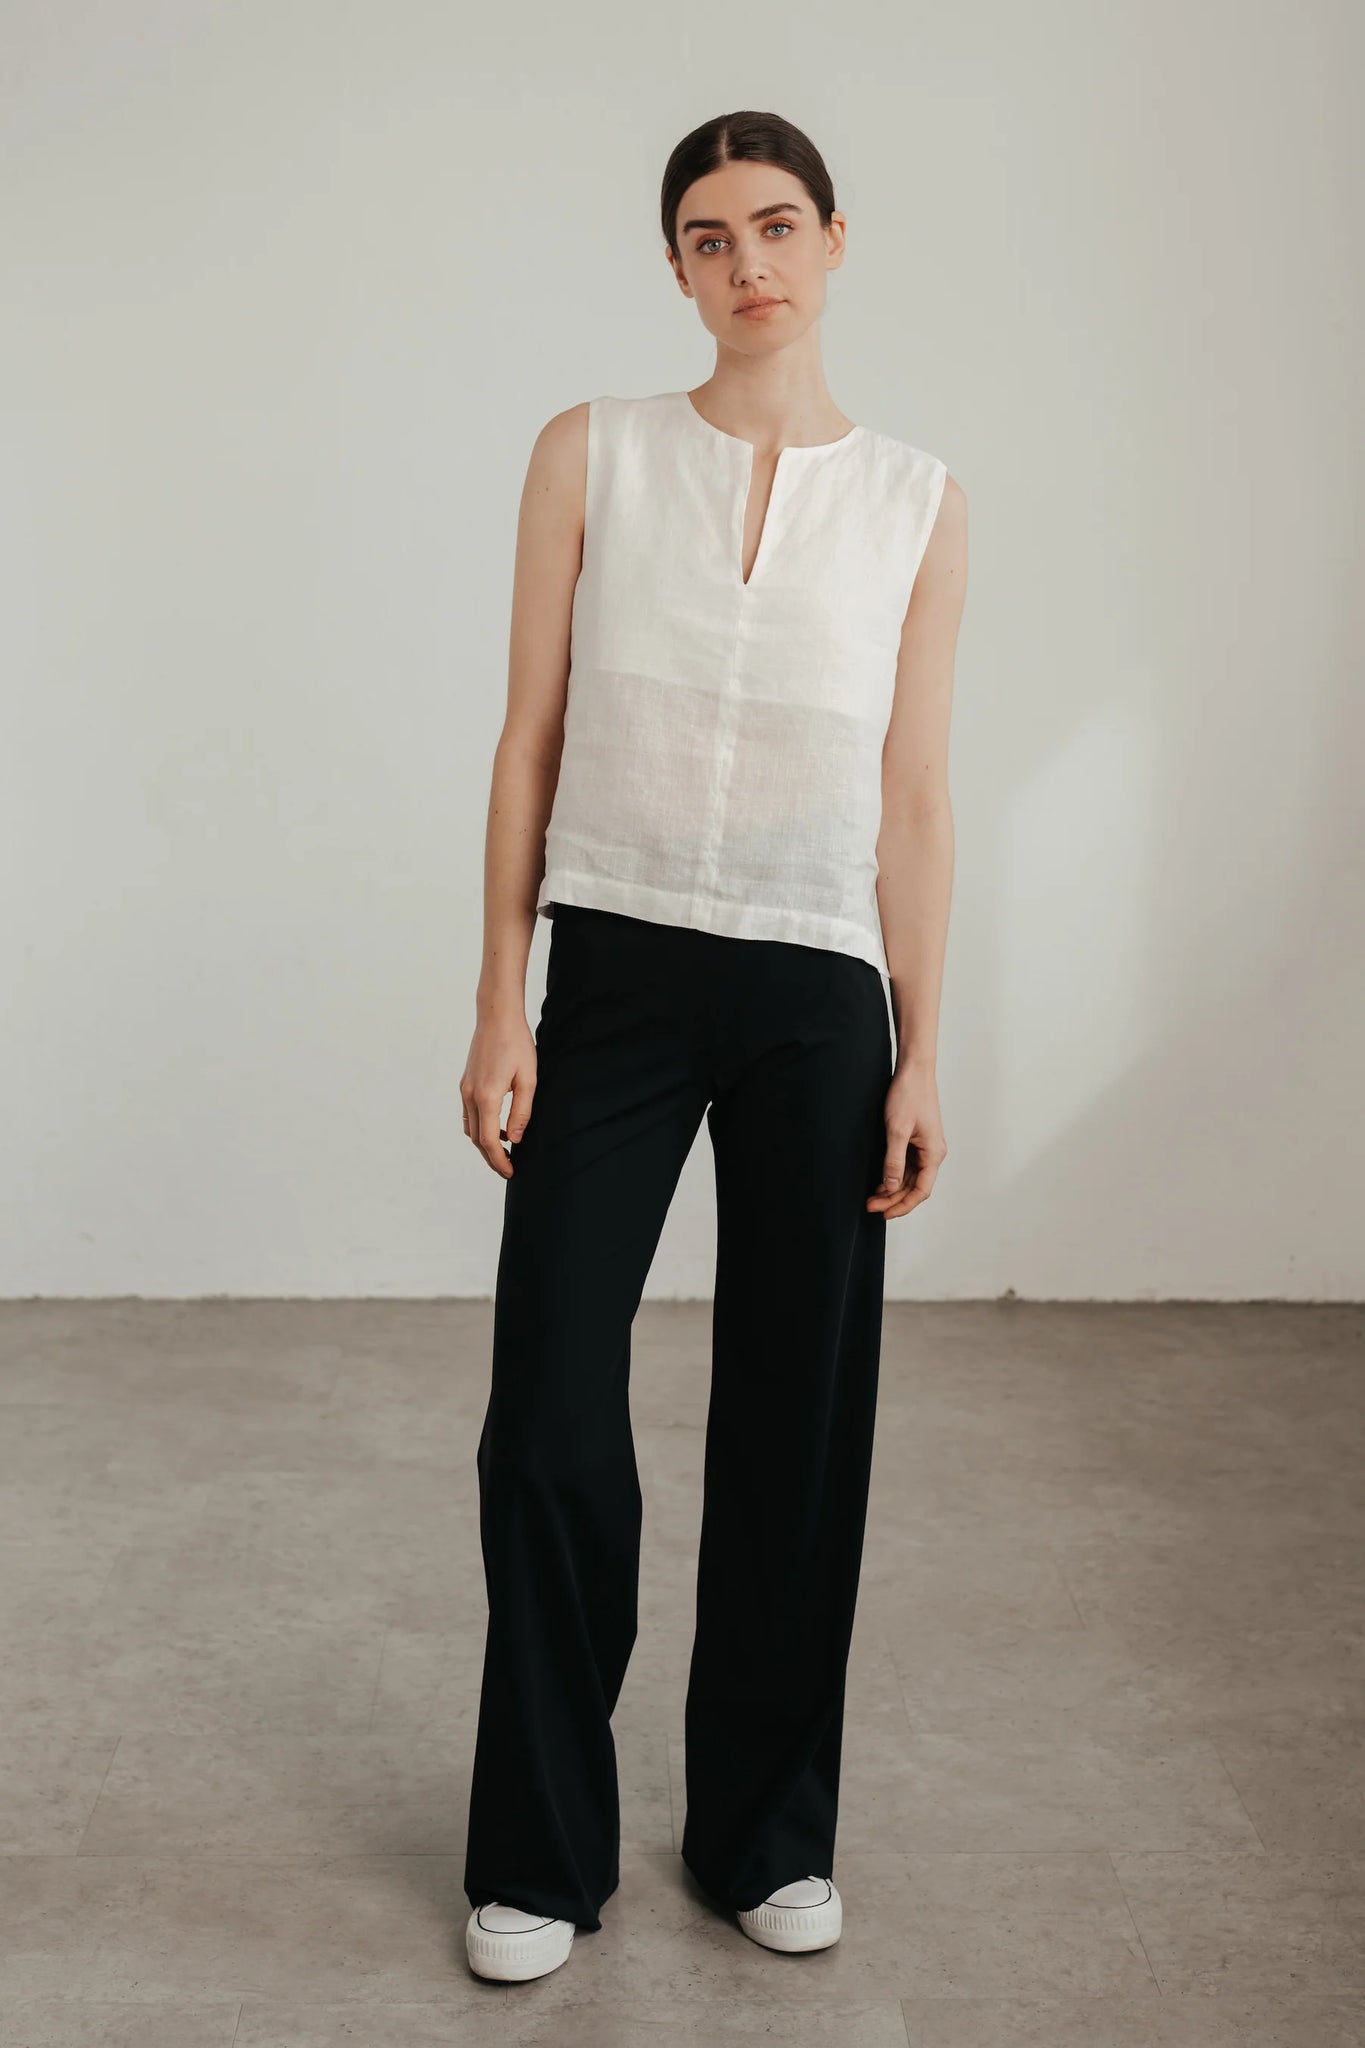 Cropped linen top in creamy white by sonho stories